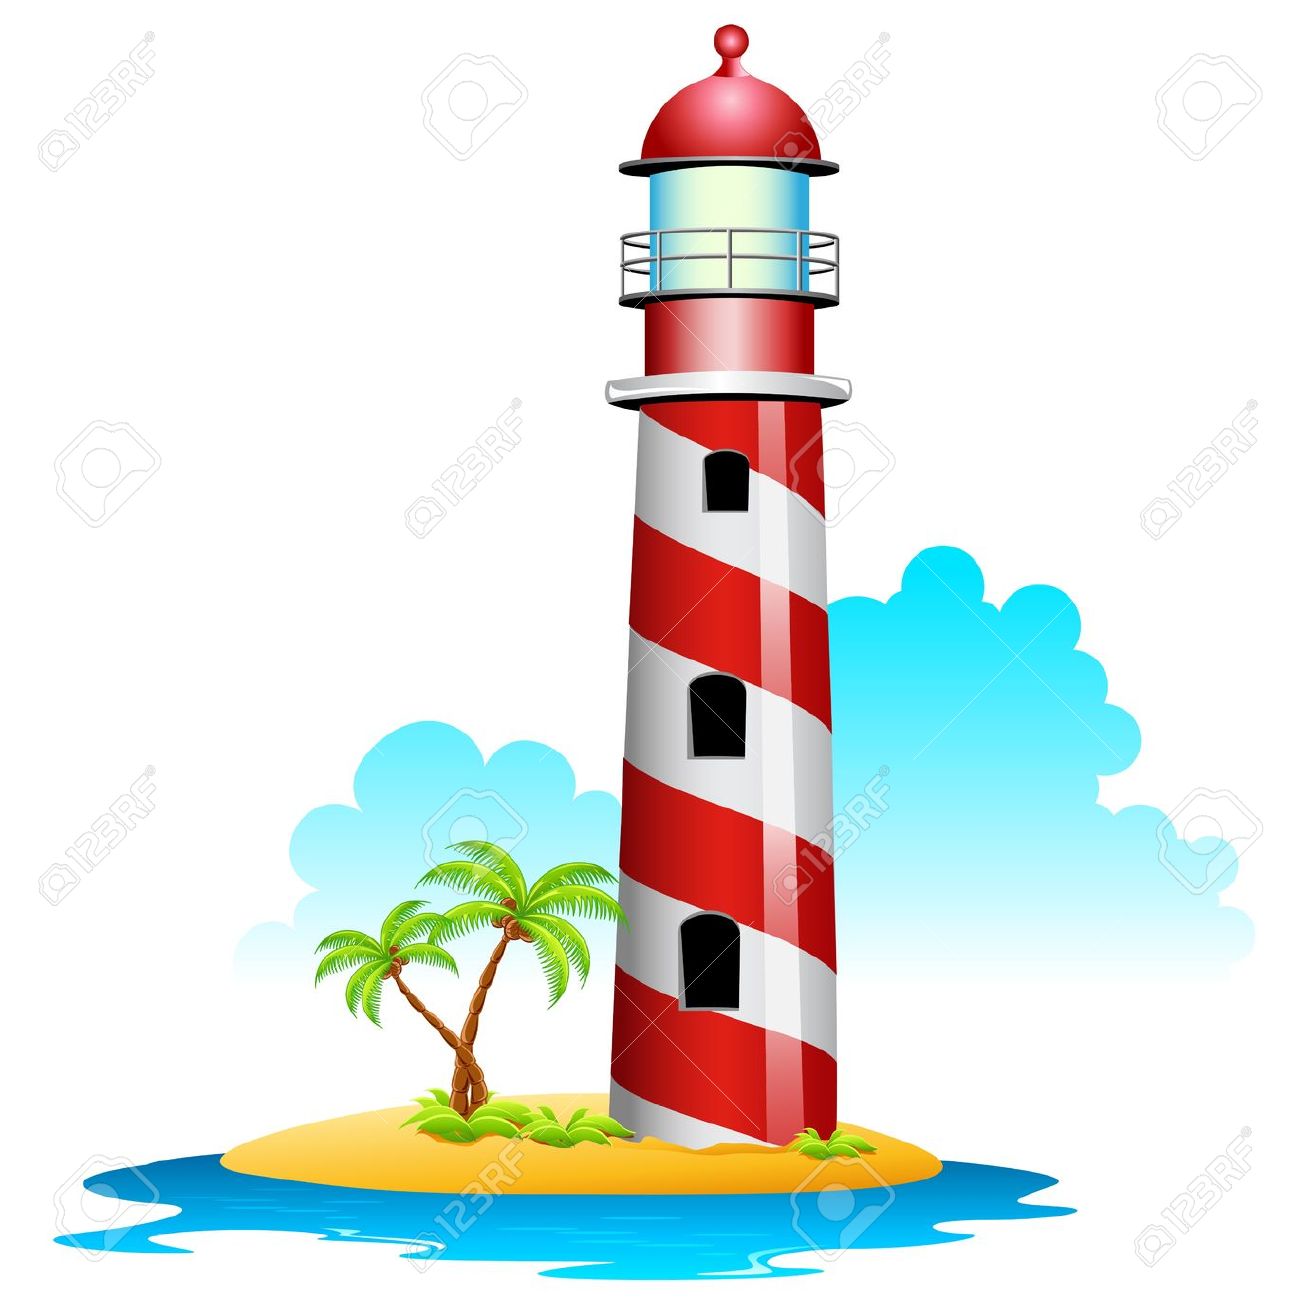 lighthouse clipart free download - photo #47